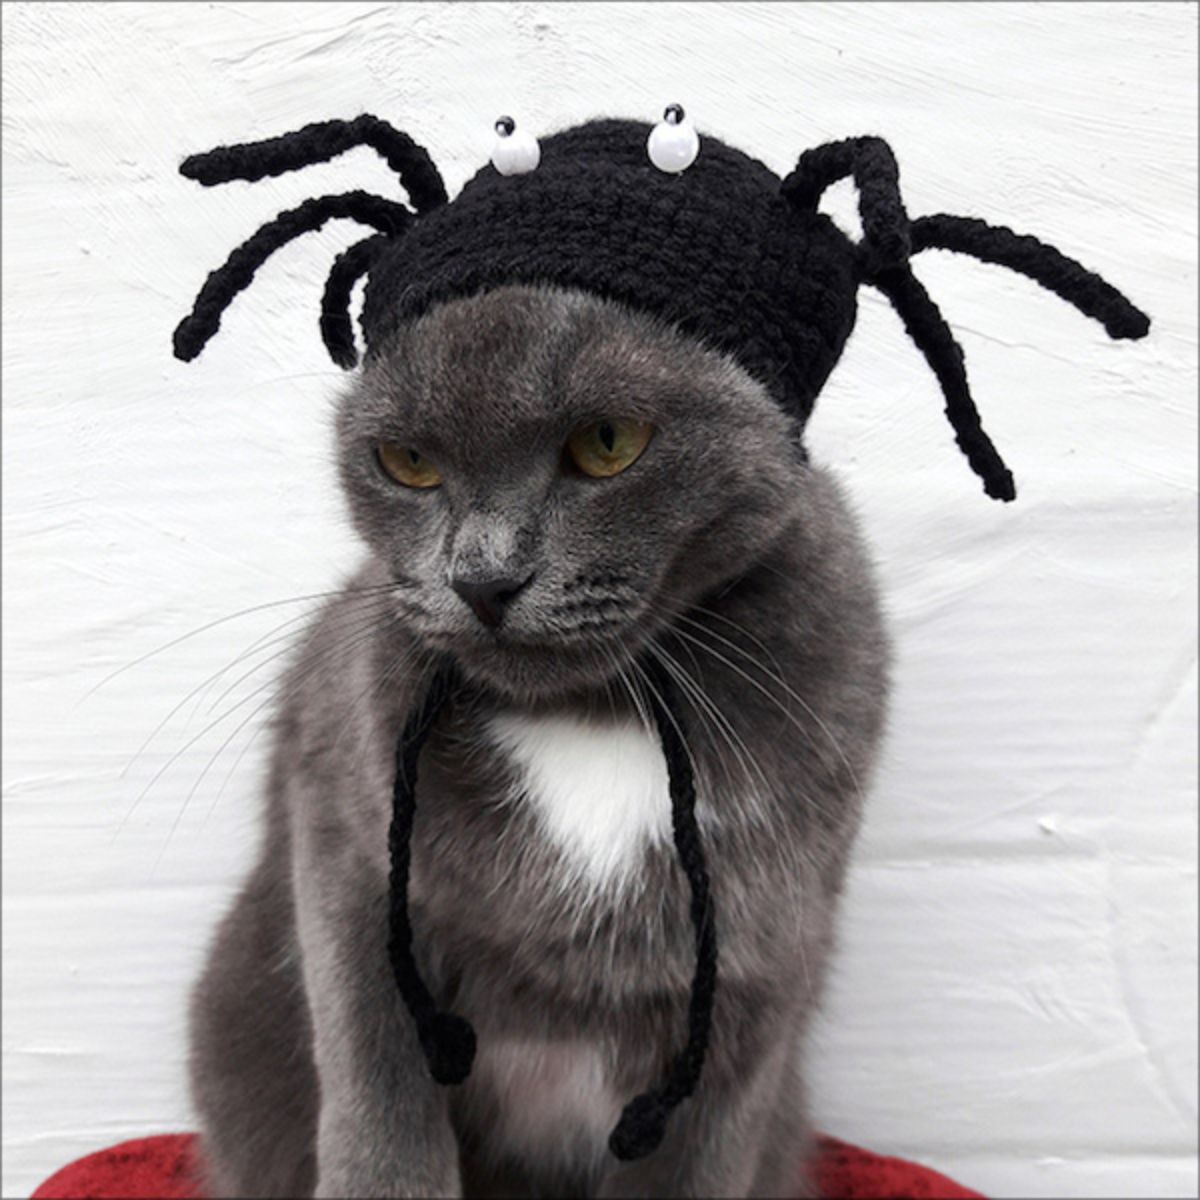 grey and white cat with a crocheted black spider hat with white and black eyes